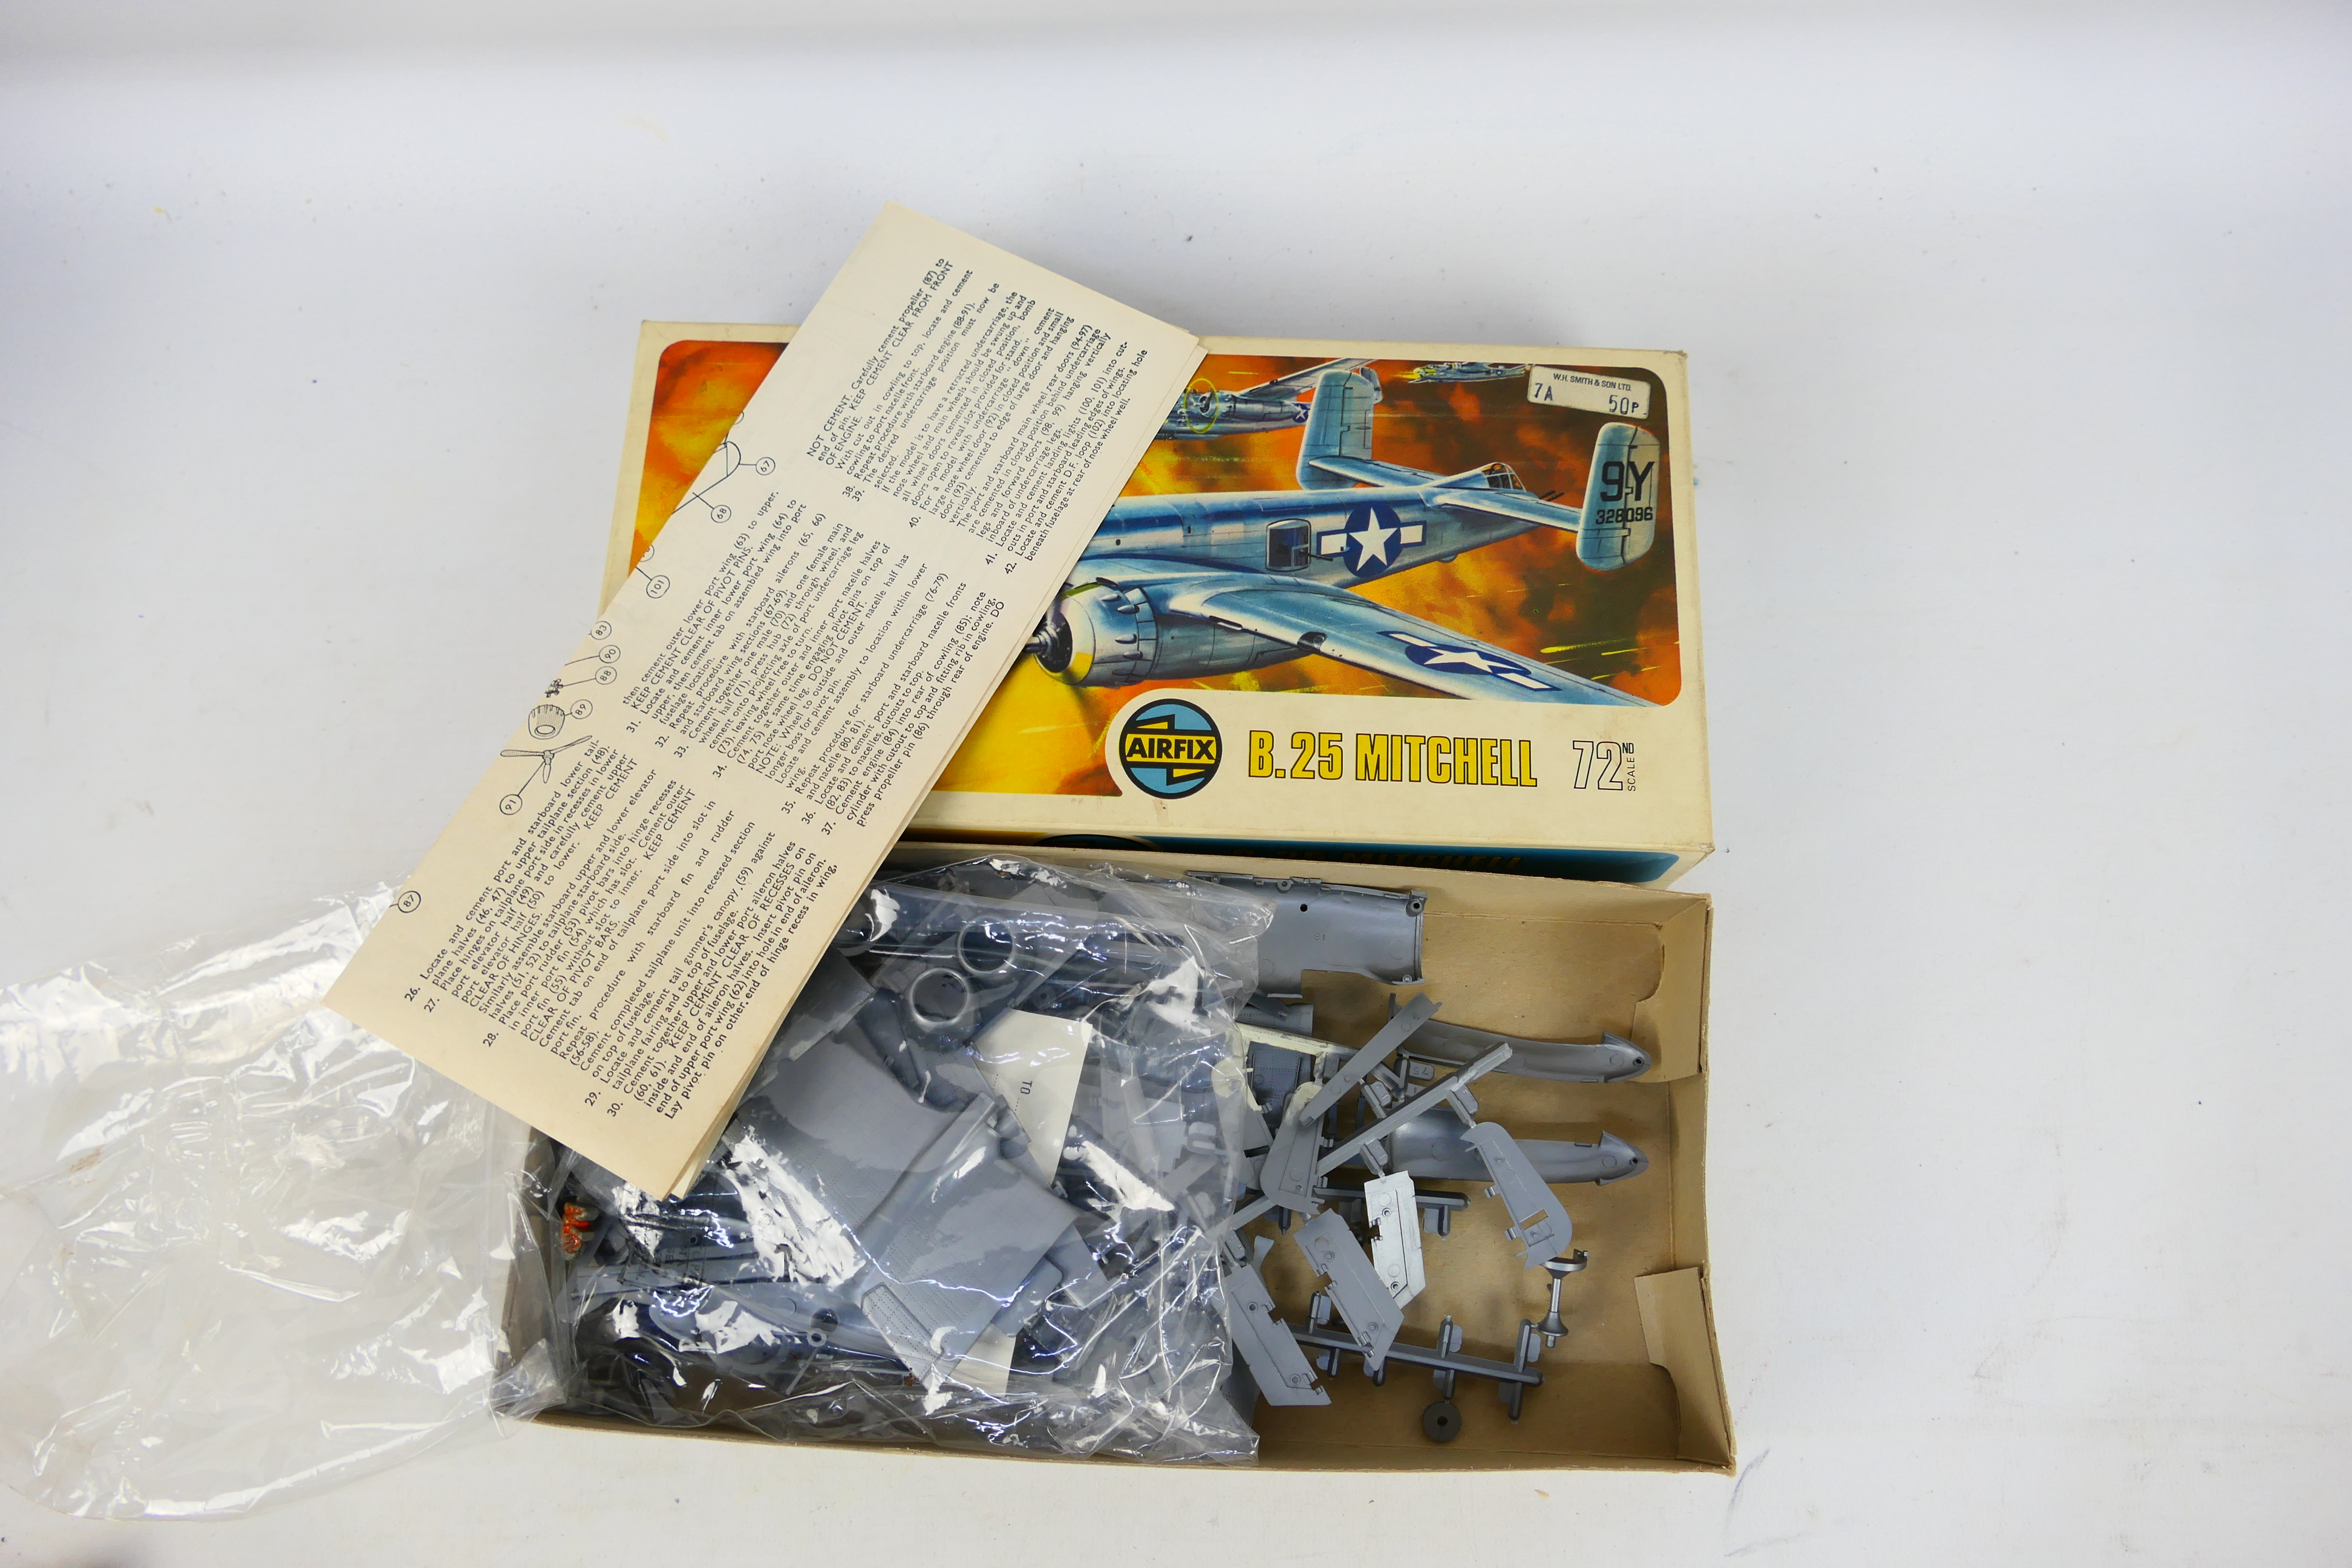 Airfix - Revell - Matchbox - 4 x vintage model kits including Gemini space capsule in 1:24 scale # - Image 4 of 12